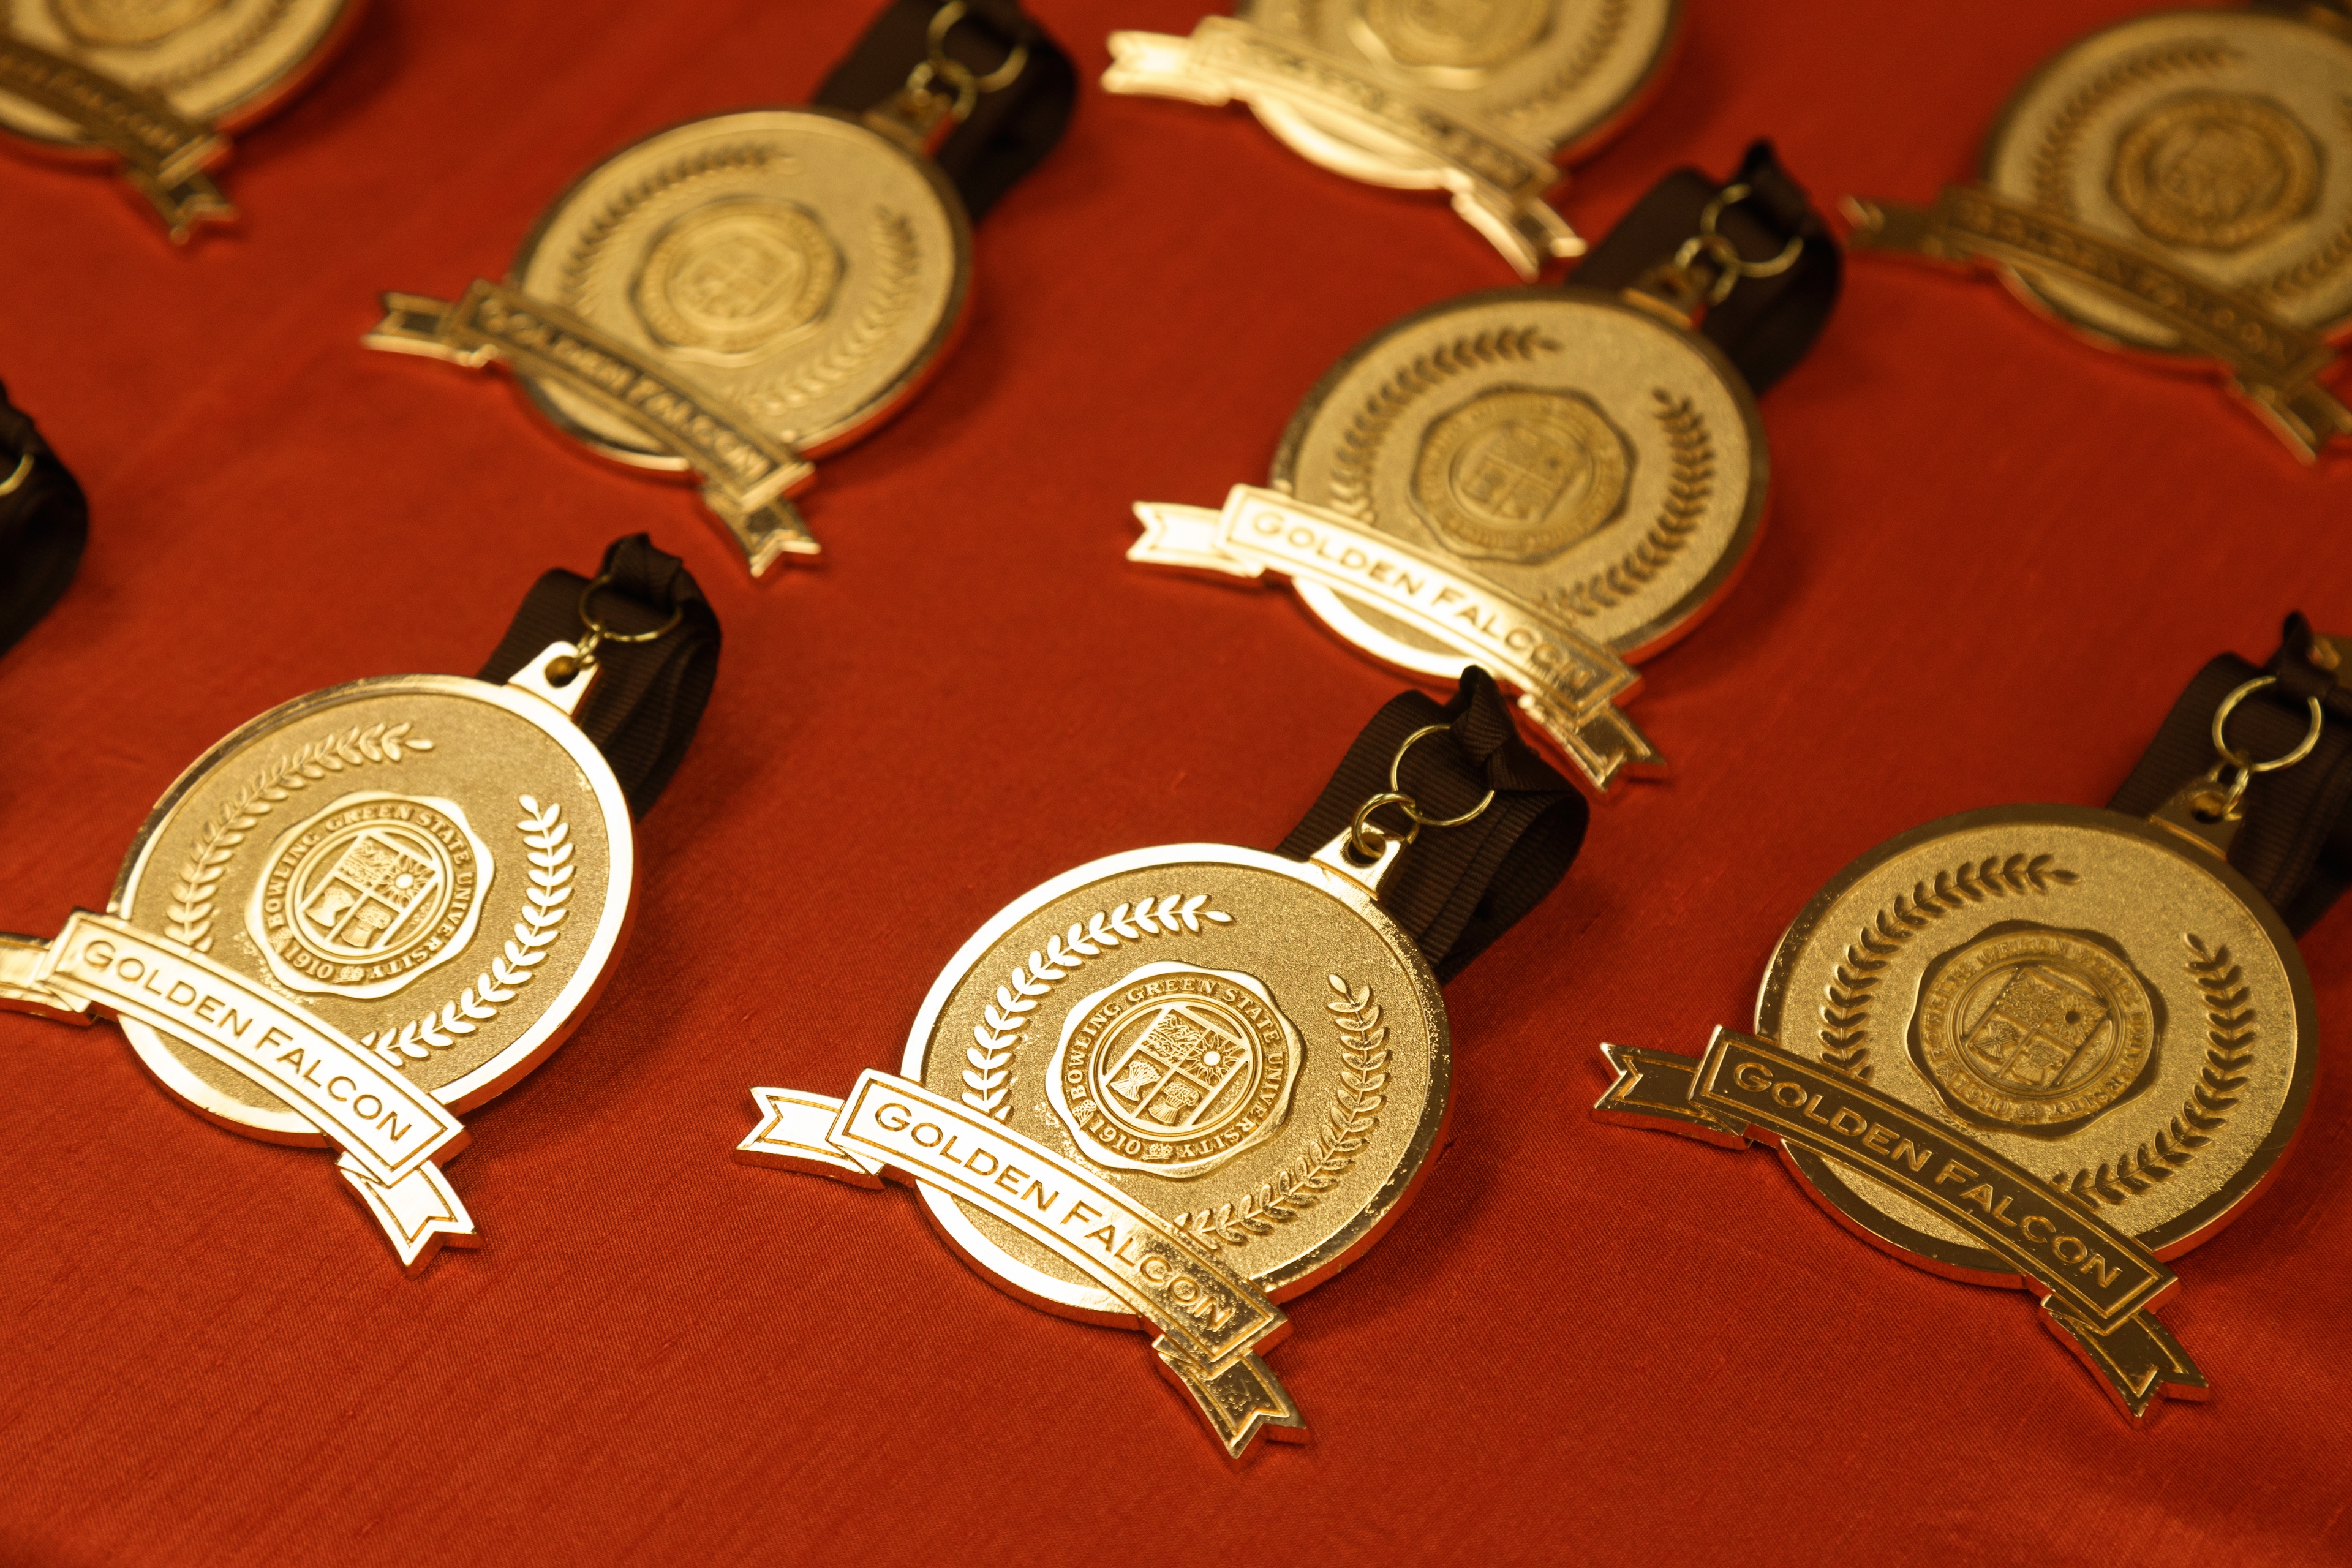 Golden Falcon medallions lay on a table